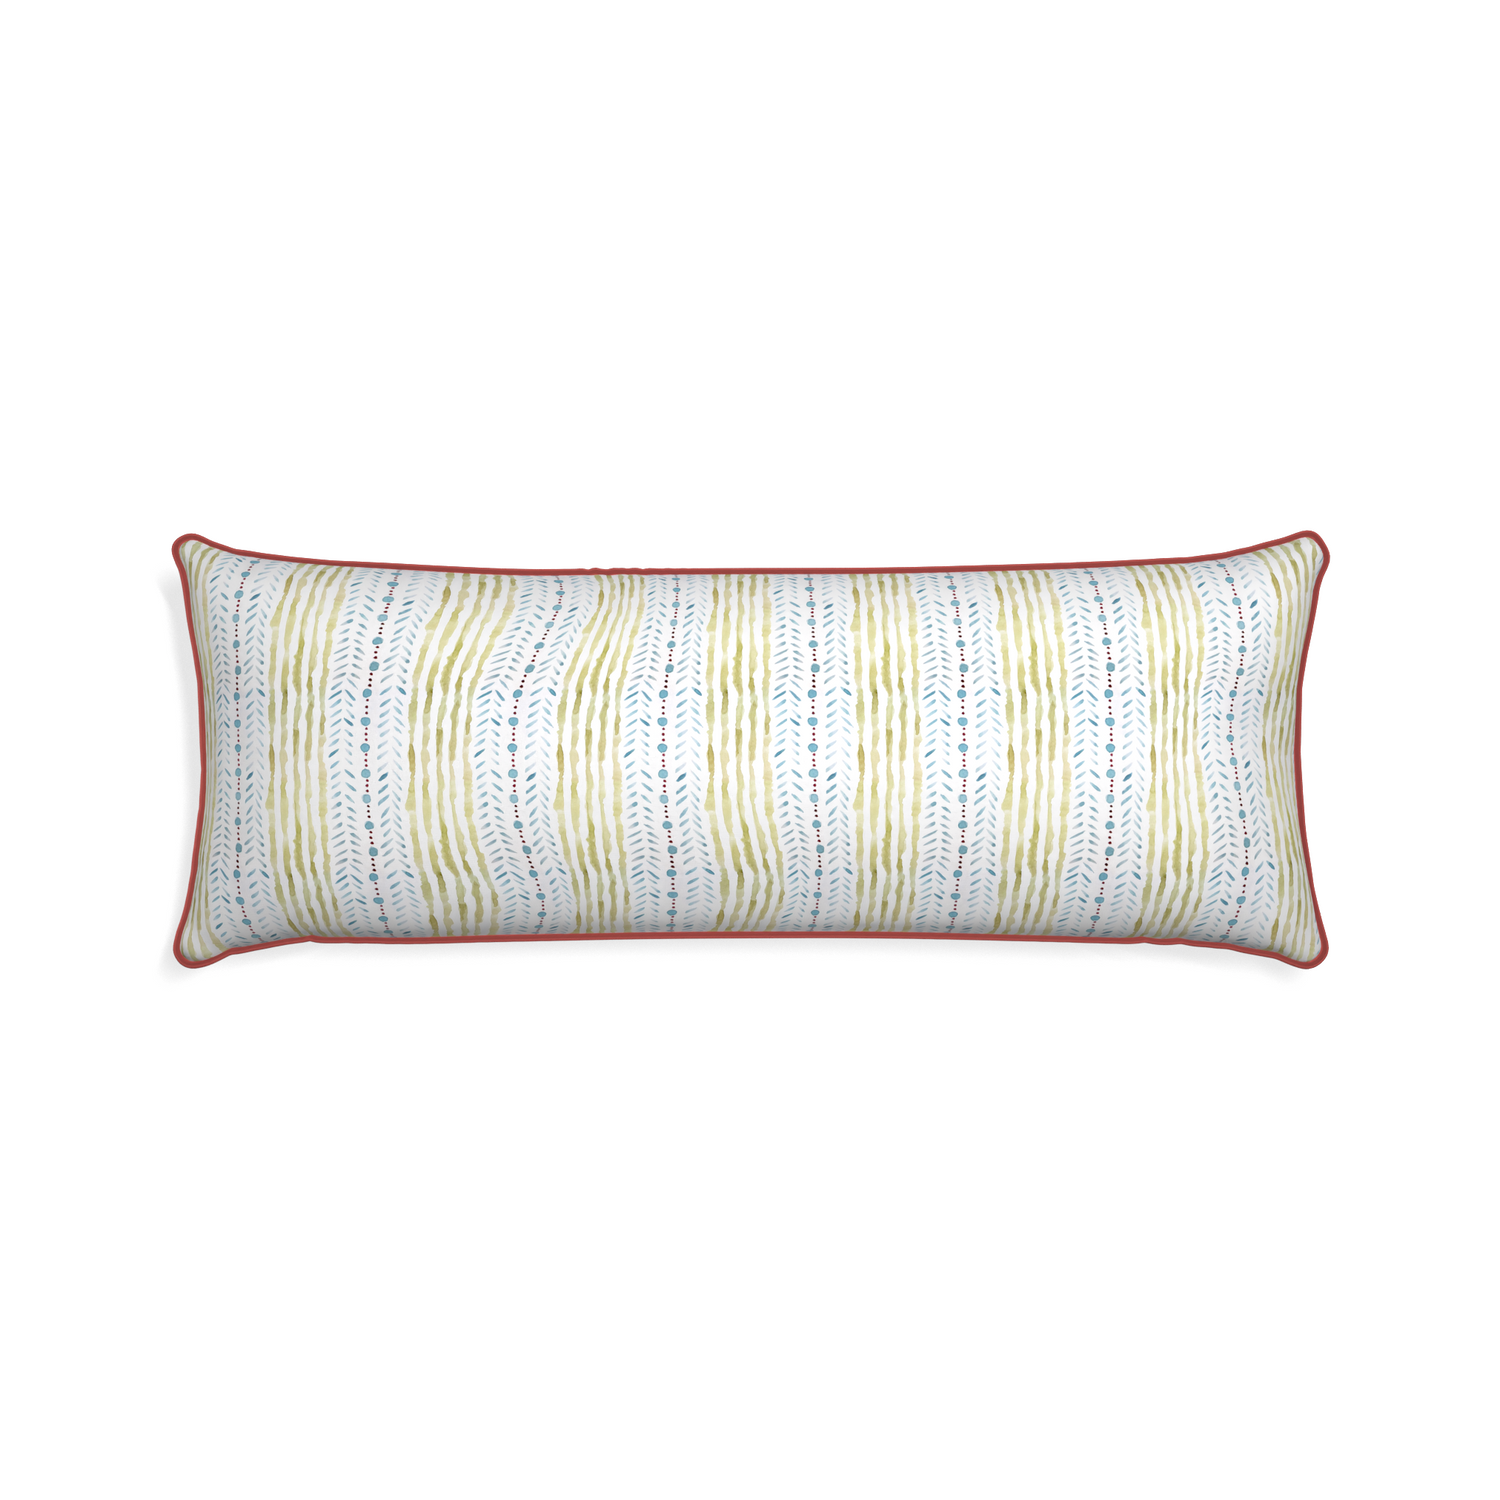 Xl-lumbar julia custom pillow with c piping on white background